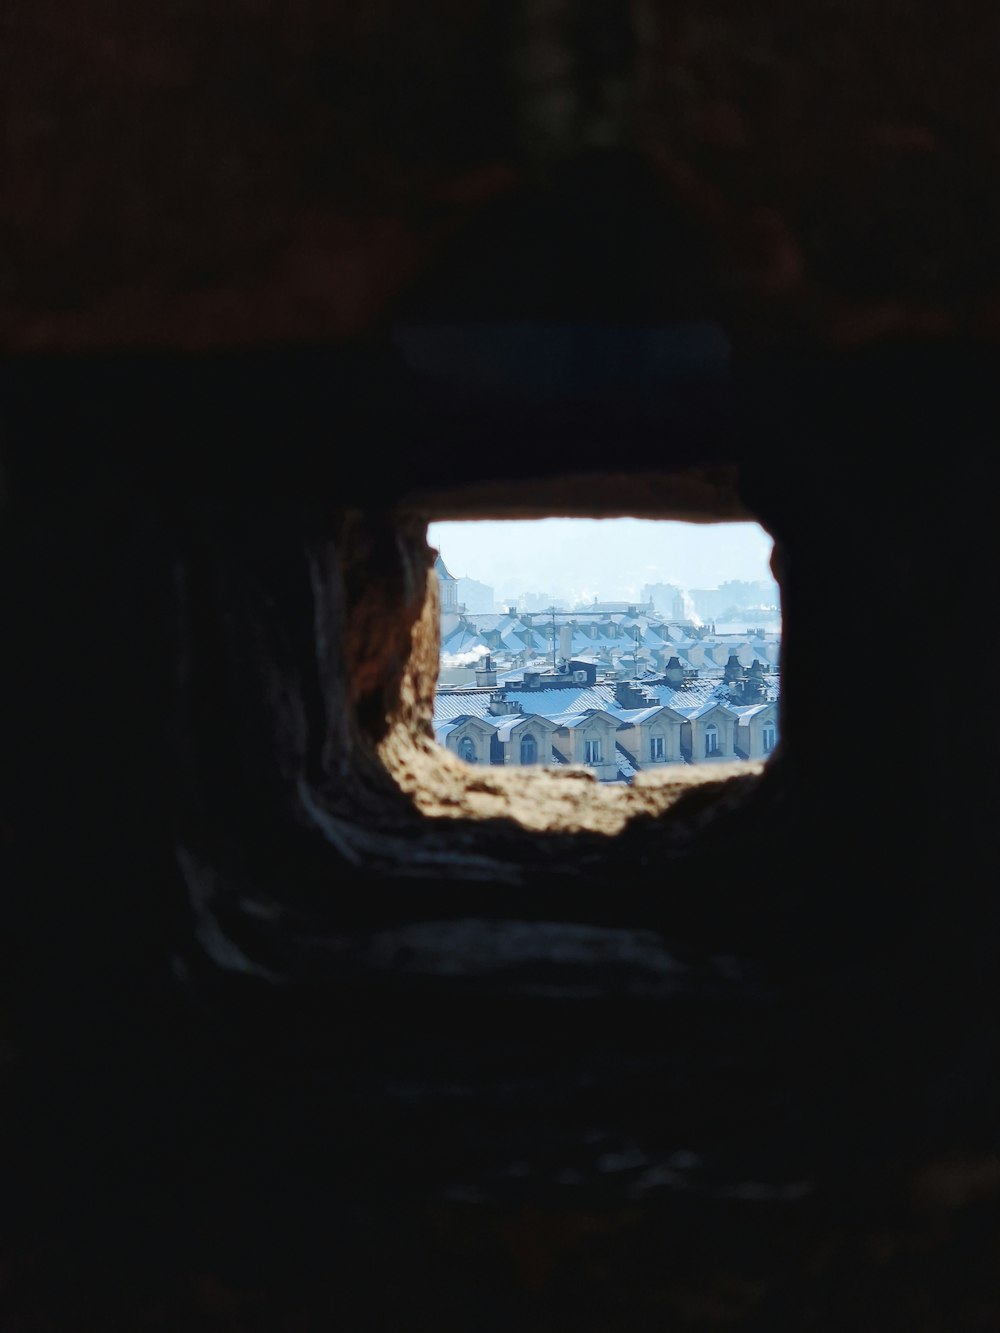 a view of a city through a hole in a wall